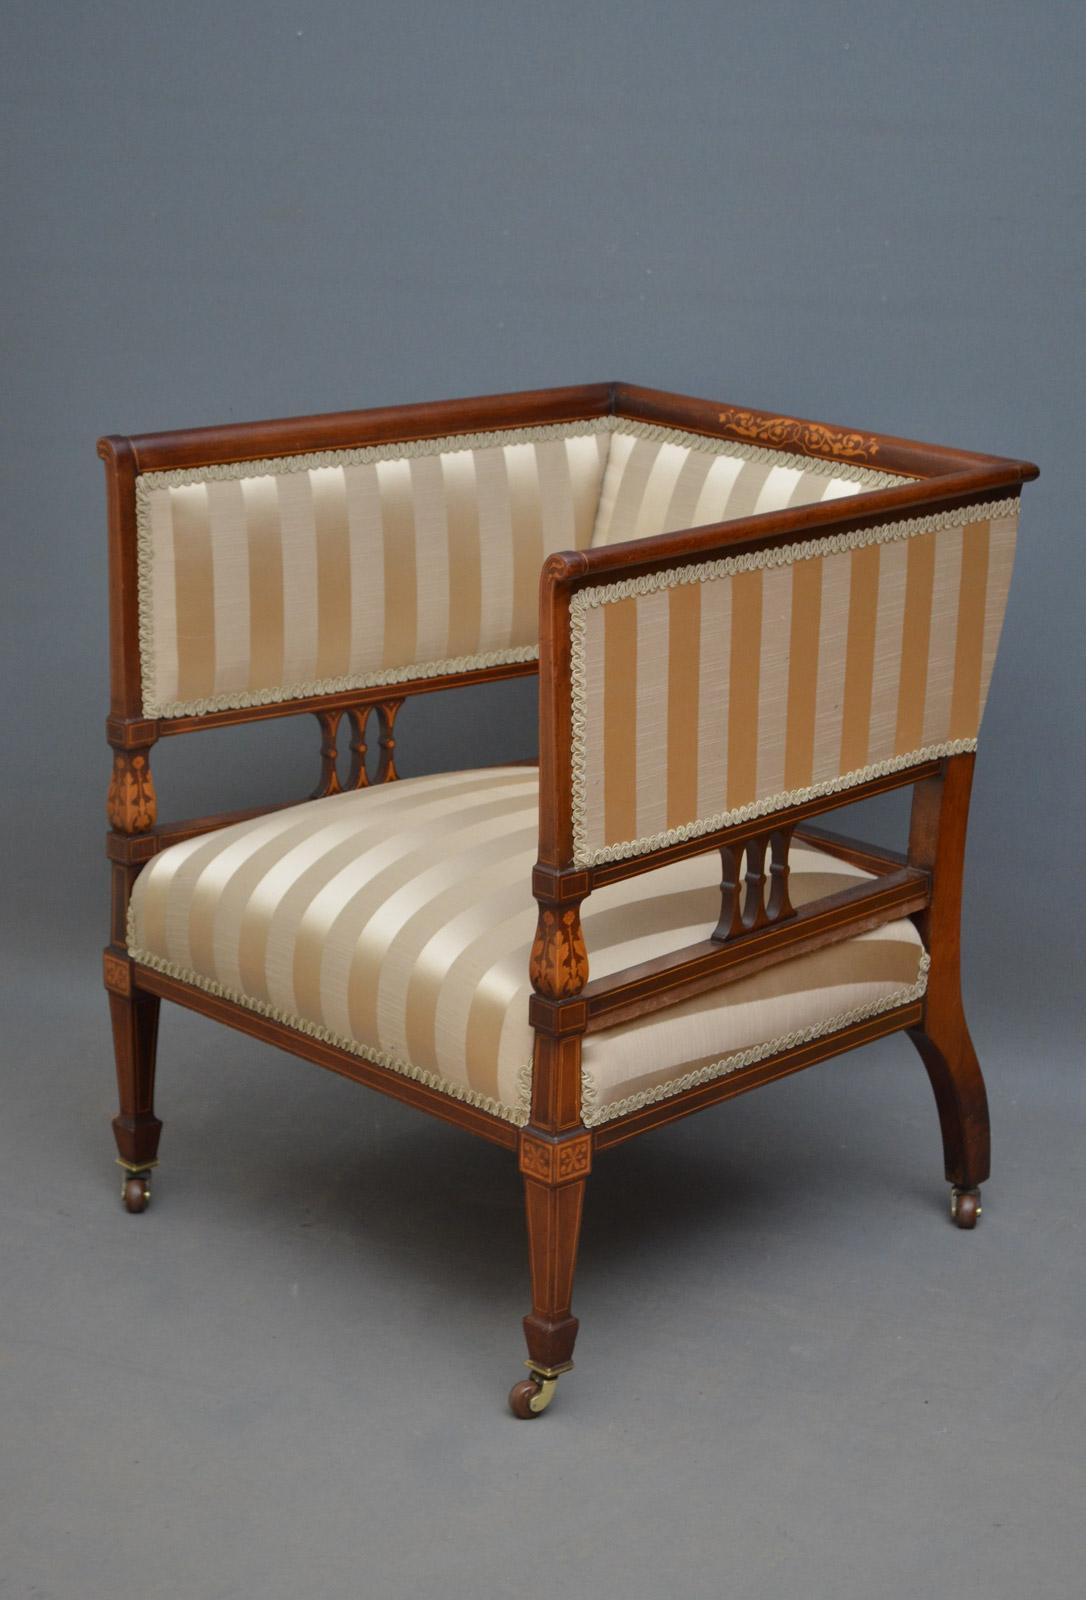 Excellent Edwardian Mahogany and Inlaid Armchair 1